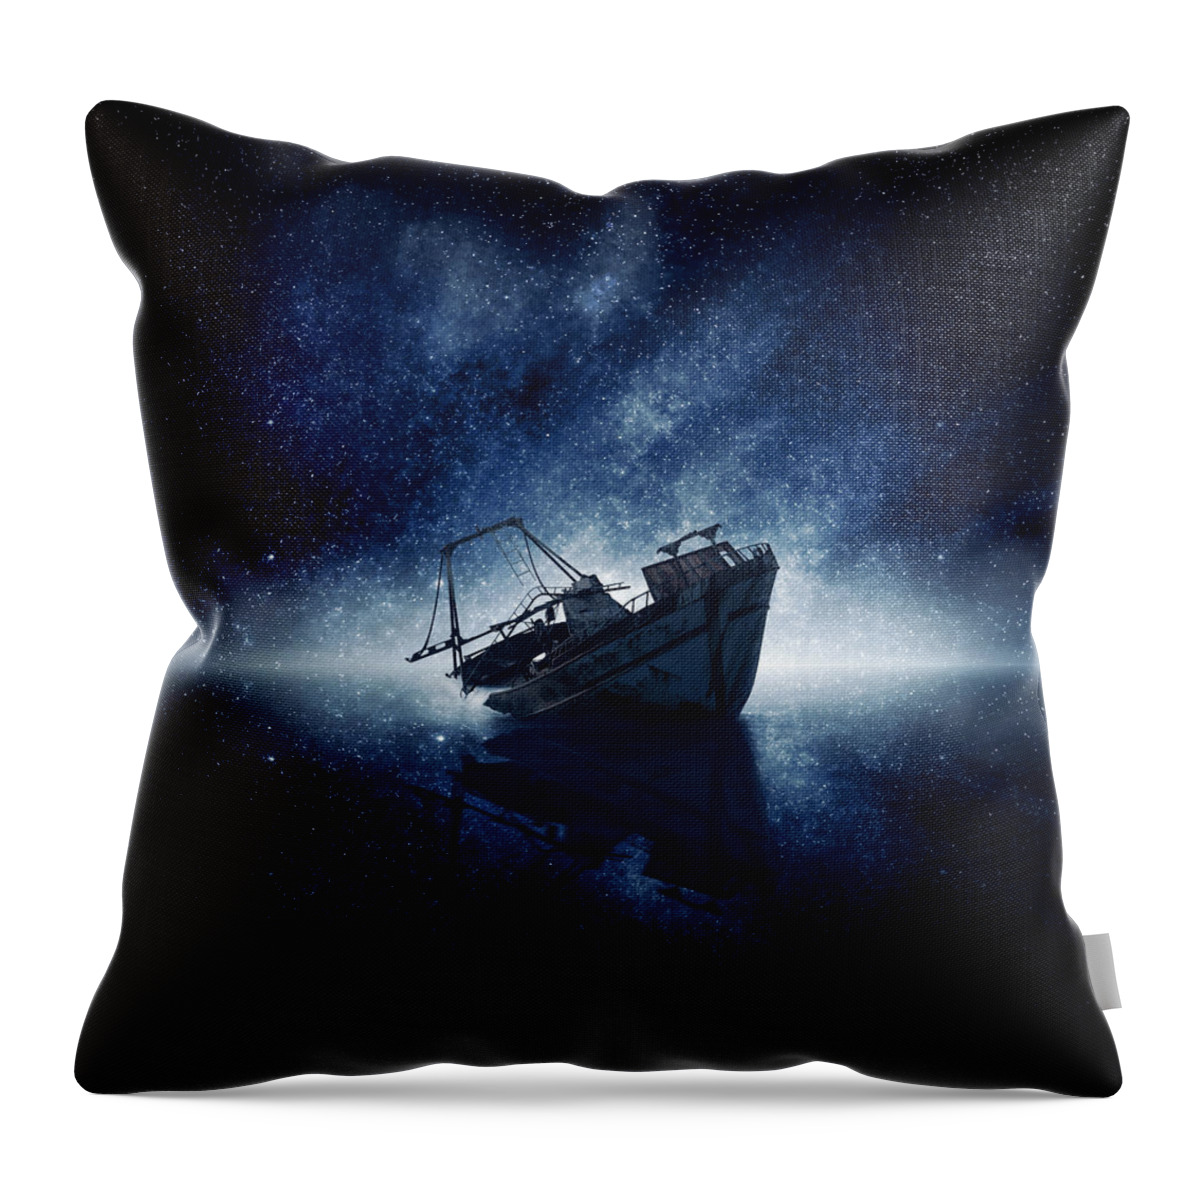 Star Throw Pillow featuring the digital art Stars by Zoltan Toth